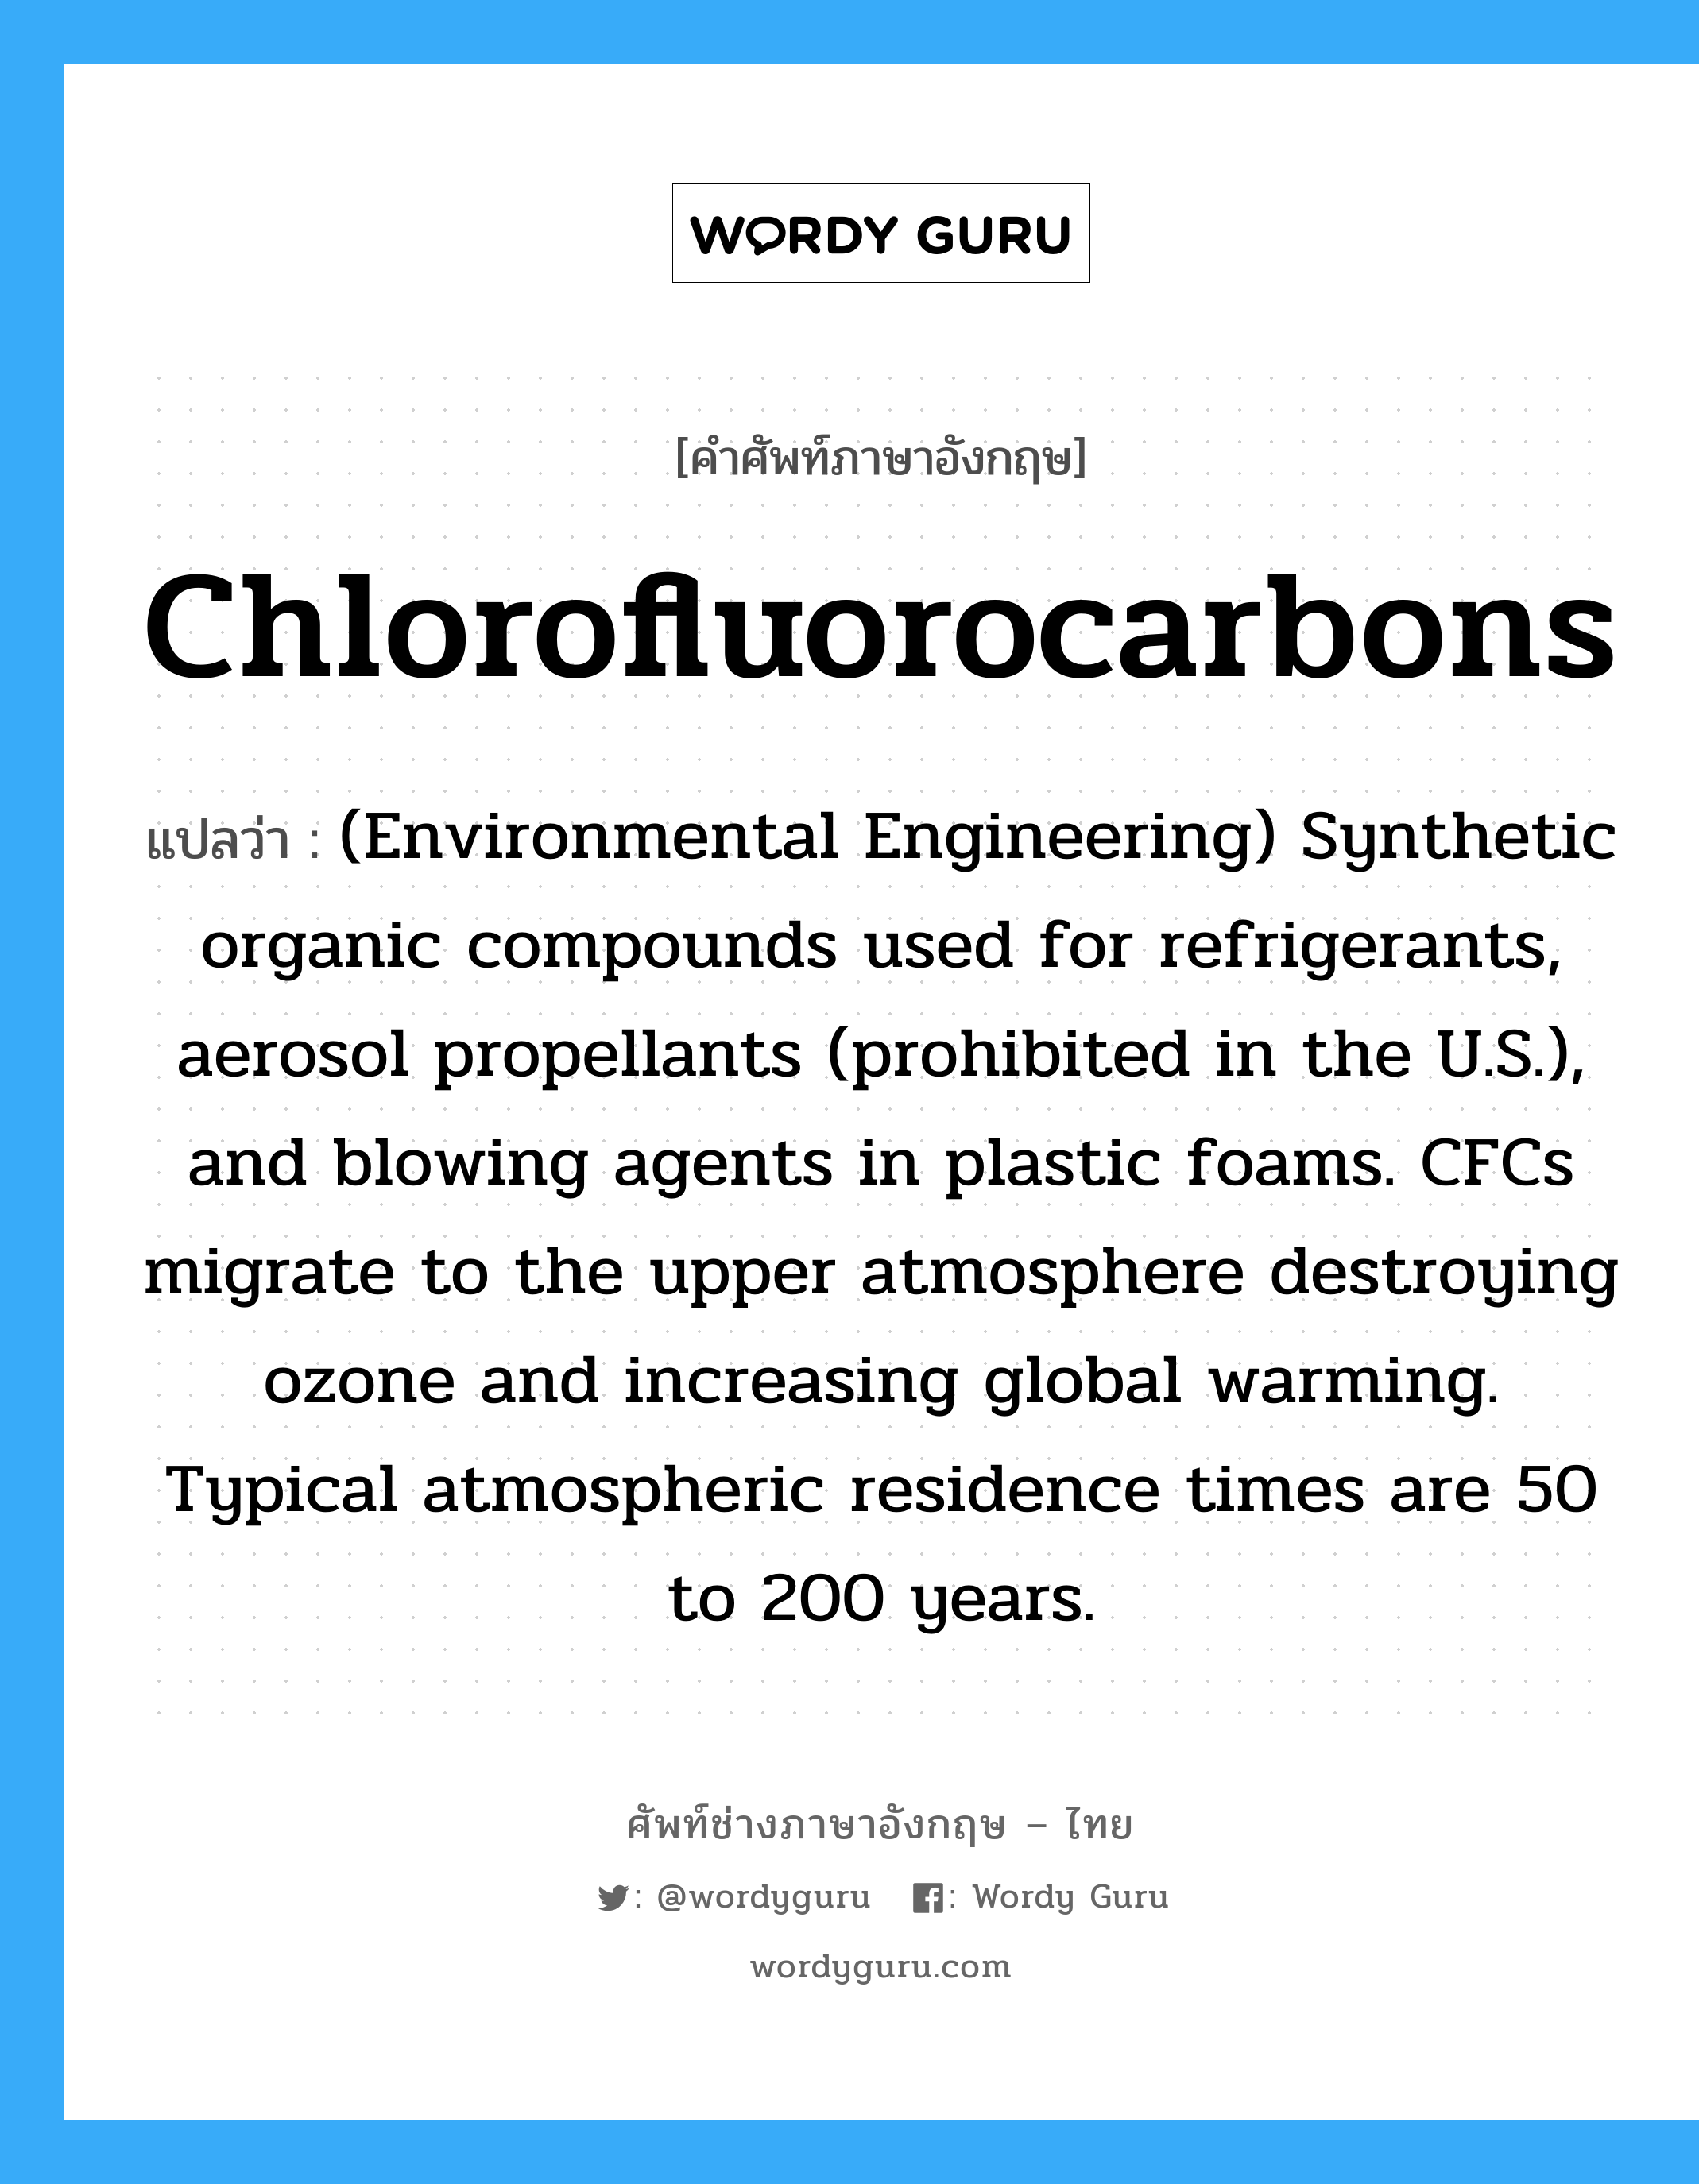 Chlorofluorocarbons แปลว่า?, คำศัพท์ช่างภาษาอังกฤษ - ไทย Chlorofluorocarbons คำศัพท์ภาษาอังกฤษ Chlorofluorocarbons แปลว่า (Environmental Engineering) Synthetic organic compounds used for refrigerants, aerosol propellants (prohibited in the U.S.), and blowing agents in plastic foams. CFCs migrate to the upper atmosphere destroying ozone and increasing global warming. Typical atmospheric residence times are 50 to 200 years.